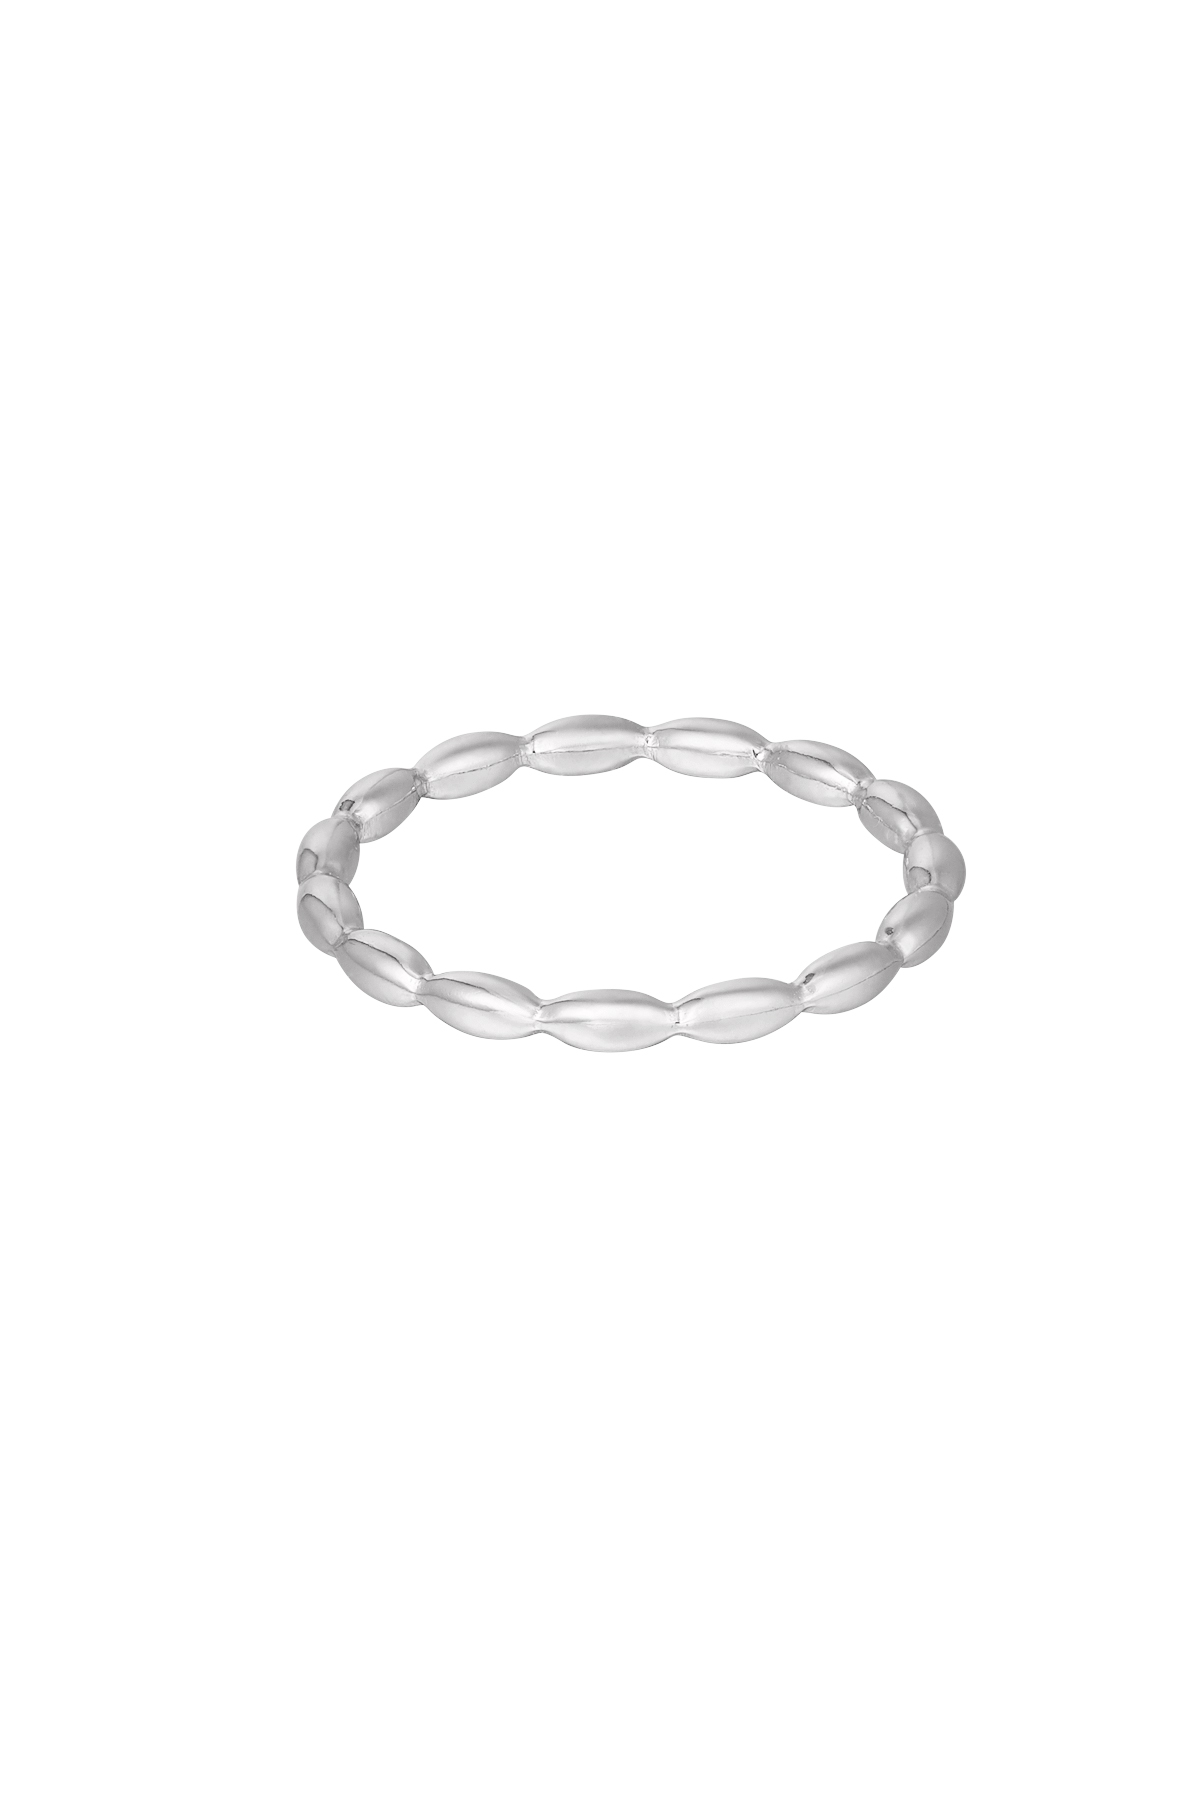 Ring connected ovals - silver h5 